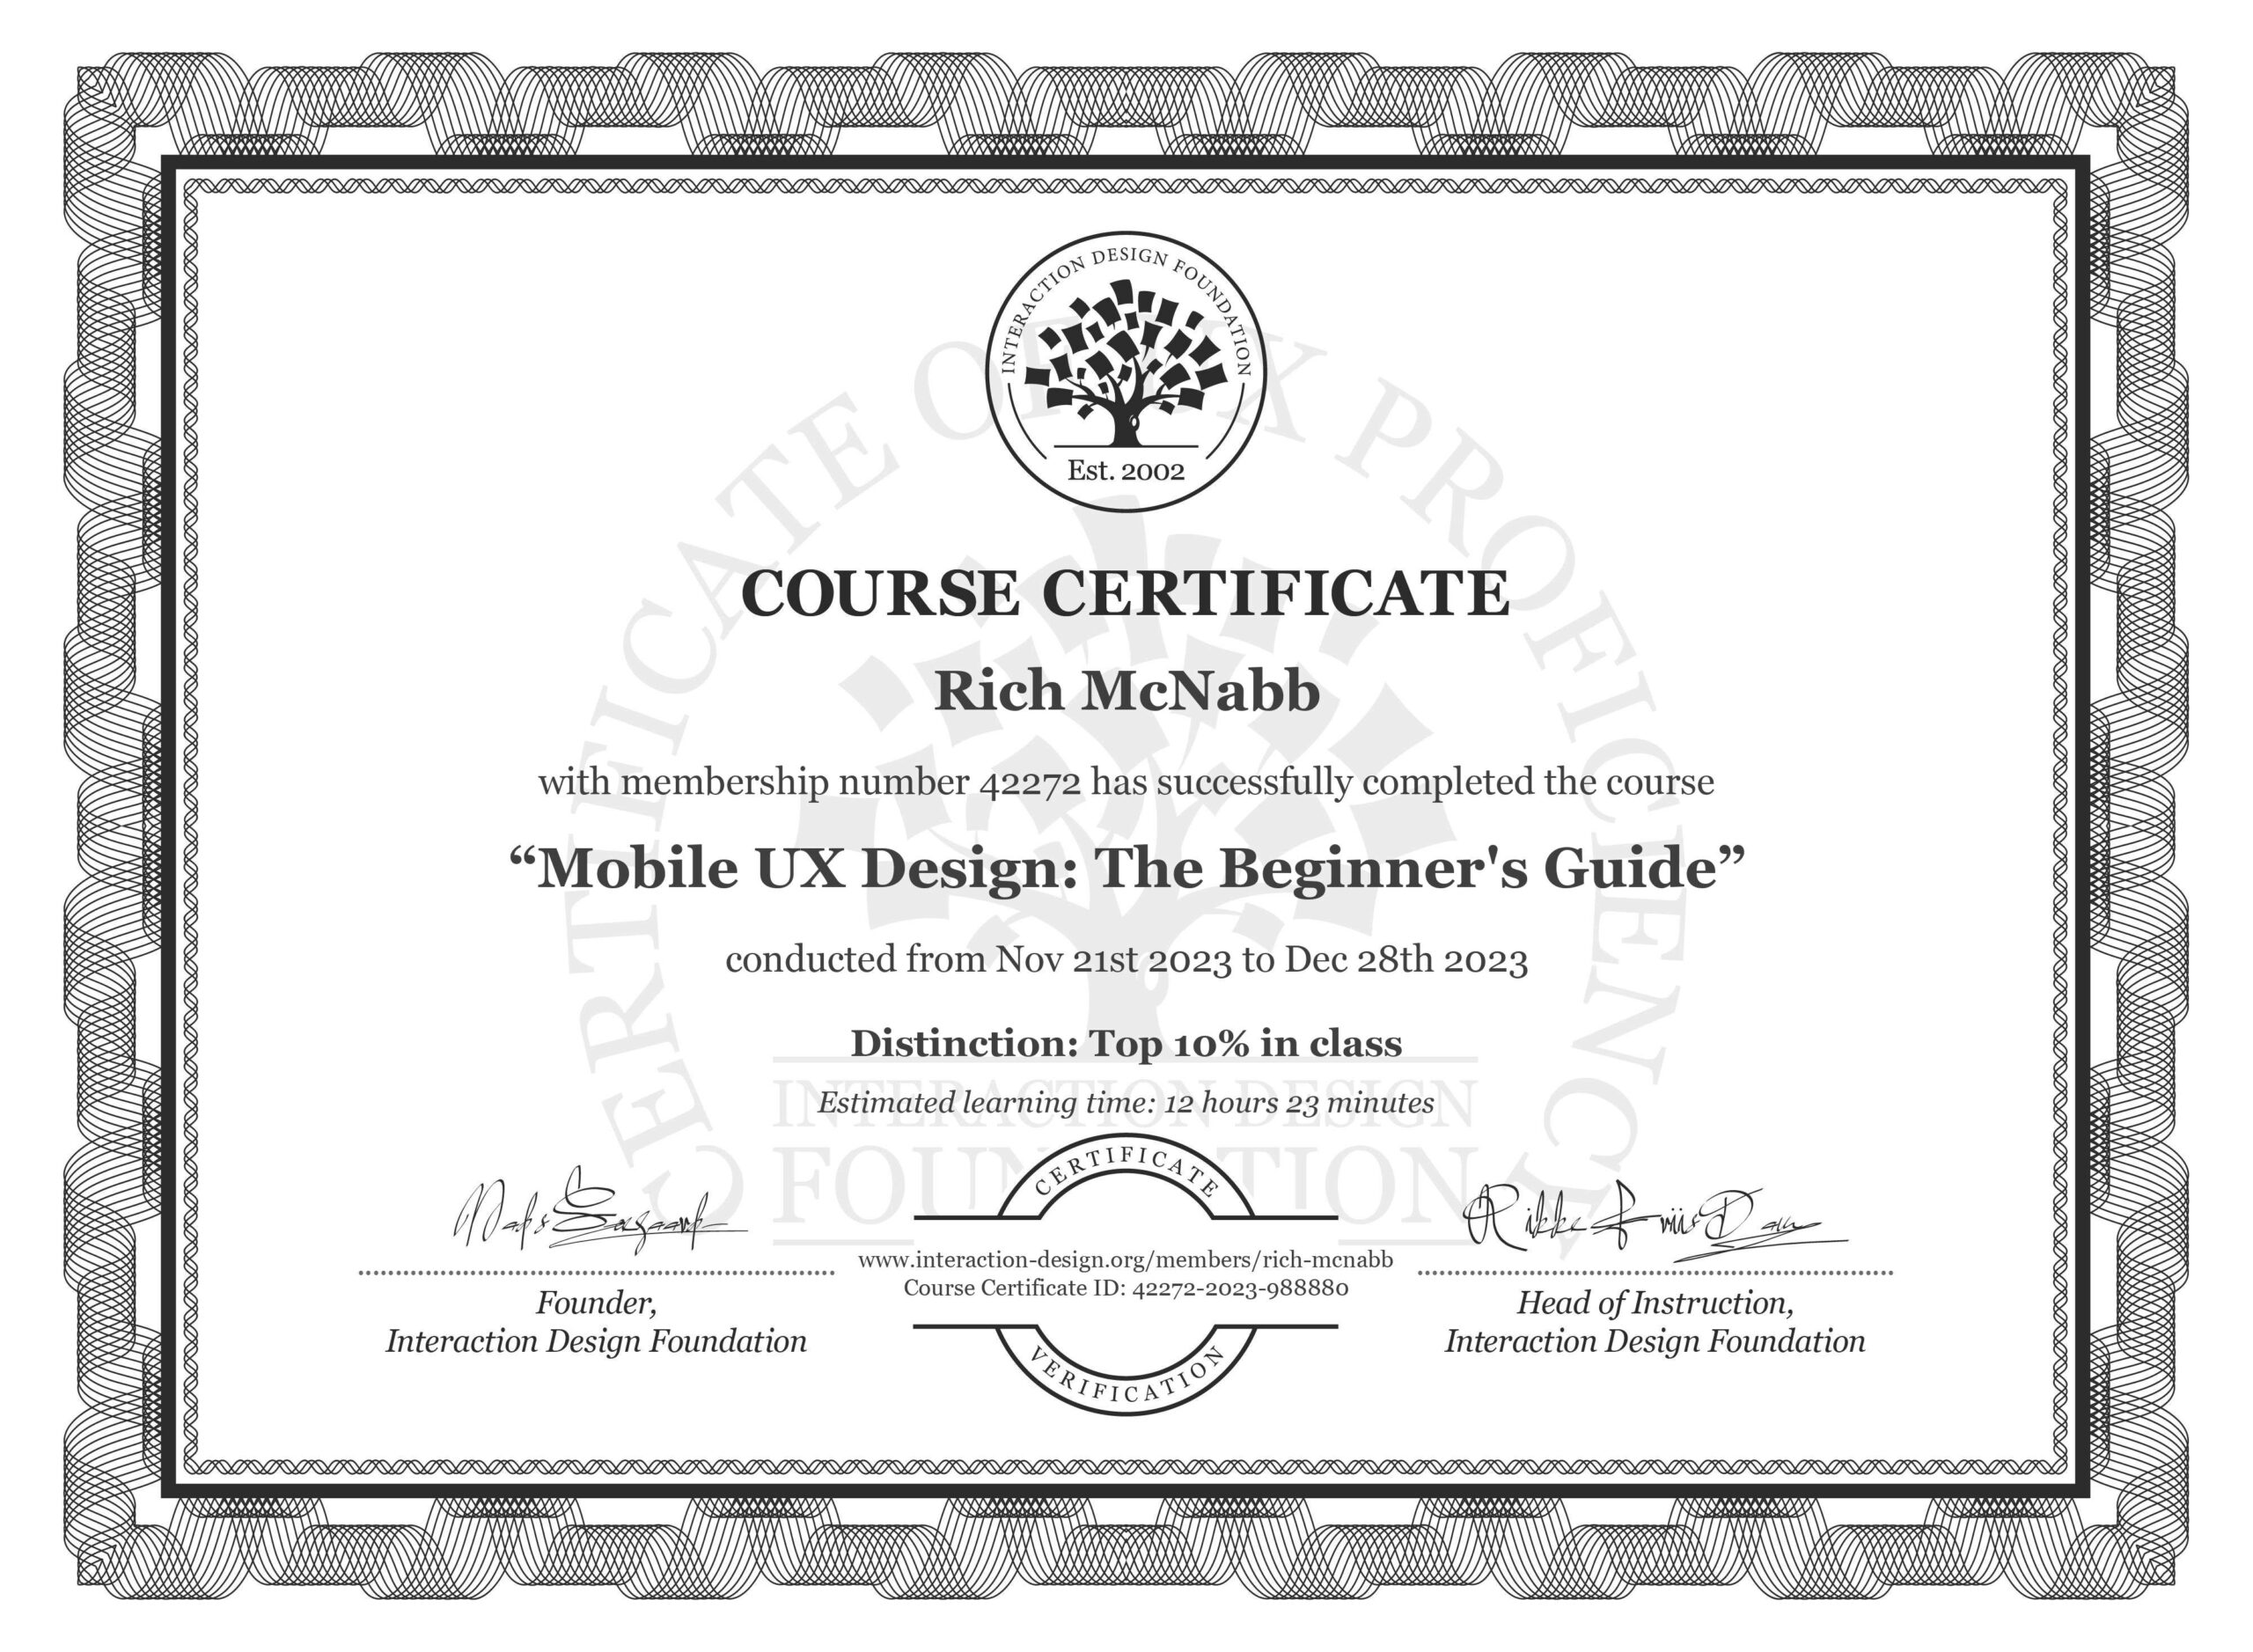 course-certificate-mobile-ux-design-course-the-beginners-guide